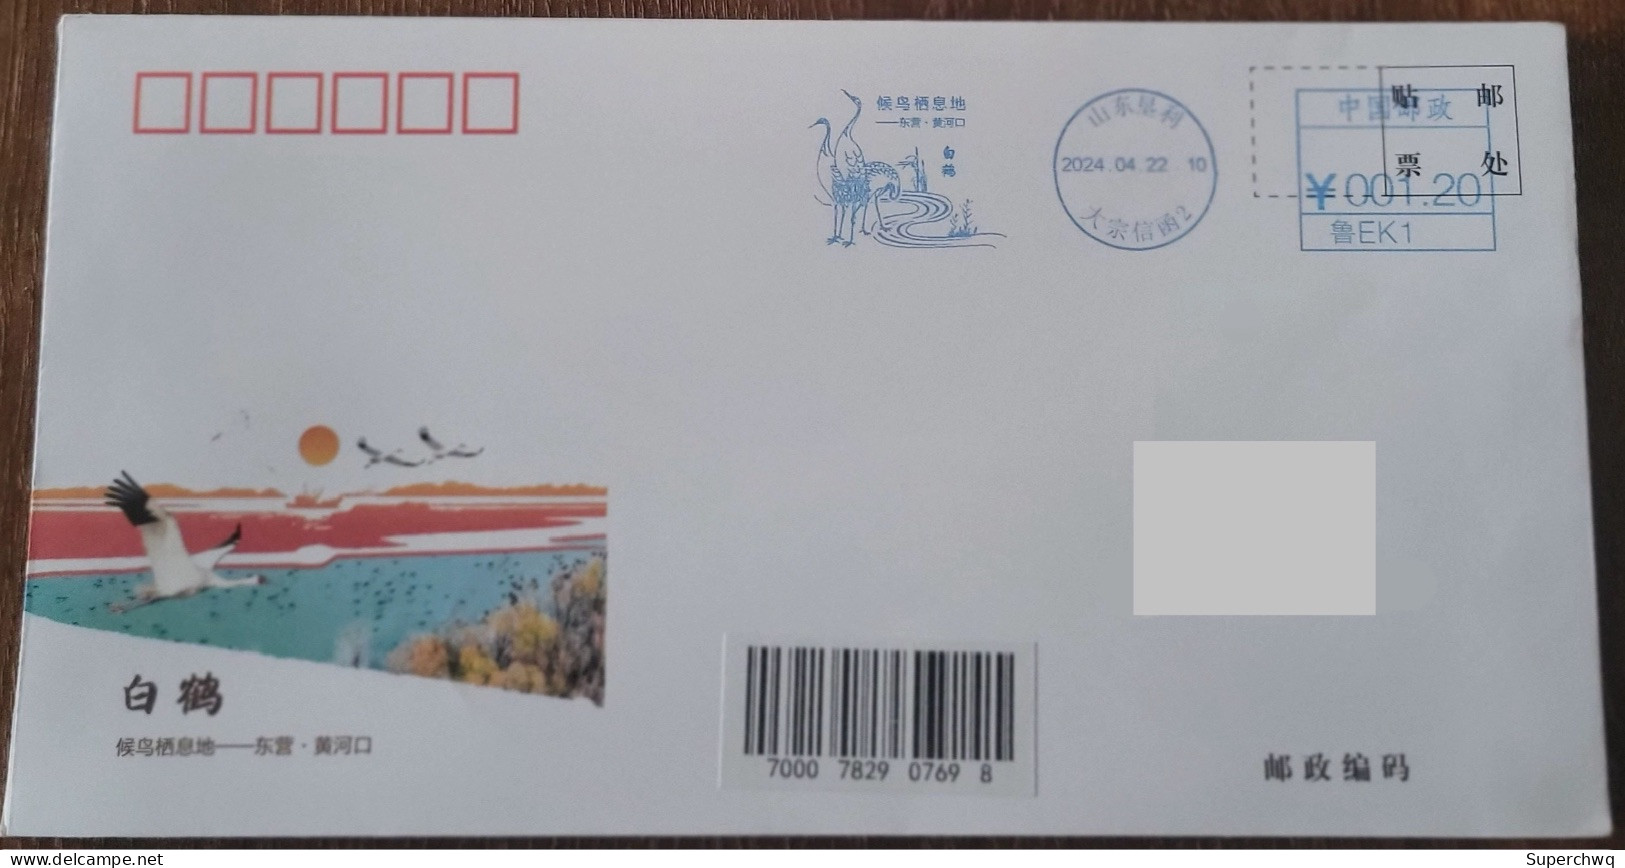 China Cover "White Crane" (Kenli, Shandong) Postage Stamp First Day Actual Sent Art Seal - Enveloppes